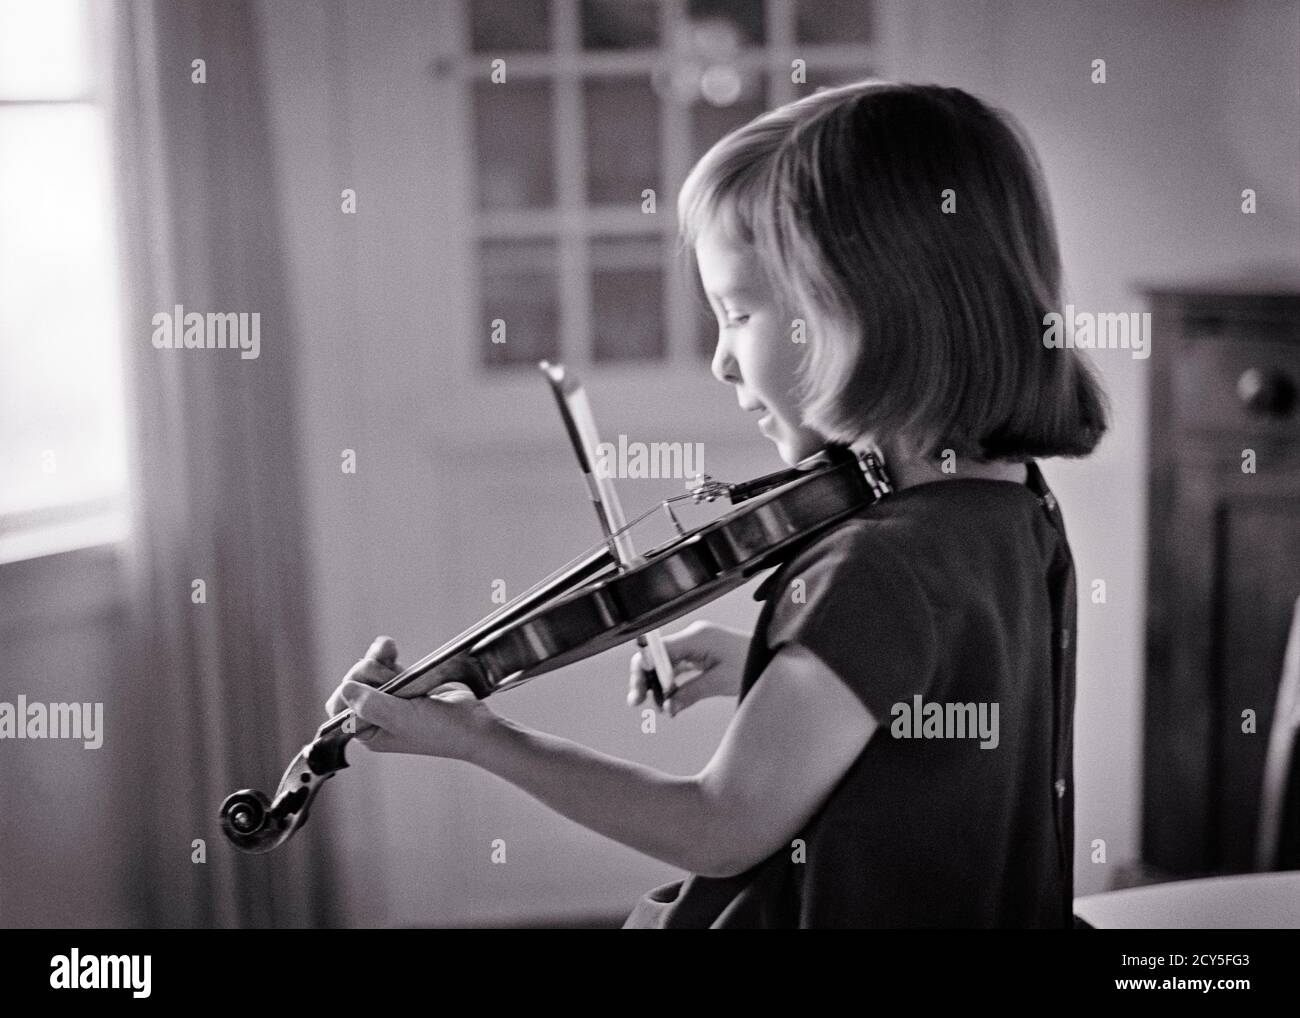 1960s PLAYING VIOLIN CHARMING LITTLE YOUNG BLOND GIRL PRACTICING LESSONS ON THREE QUARTER SIZE INSTRUMENT IN LIVING ROOM AT HOME - m7568 HAR001 HARS COPY SPACE HALF-LENGTH PRACTICE STRINGS B&W PERFORMING ARTS TEMPTATION DREAMS LESSONS SIZE RECREATION AT IN ON VIBRATION VIOLINS MUSICAL INSTRUMENT CONCEPTUAL CHARMING GROWTH JUVENILES YOUNGSTER BLACK AND WHITE CAUCASIAN ETHNICITY HAR001 OLD FASHIONED PRACTICING Stock Photo